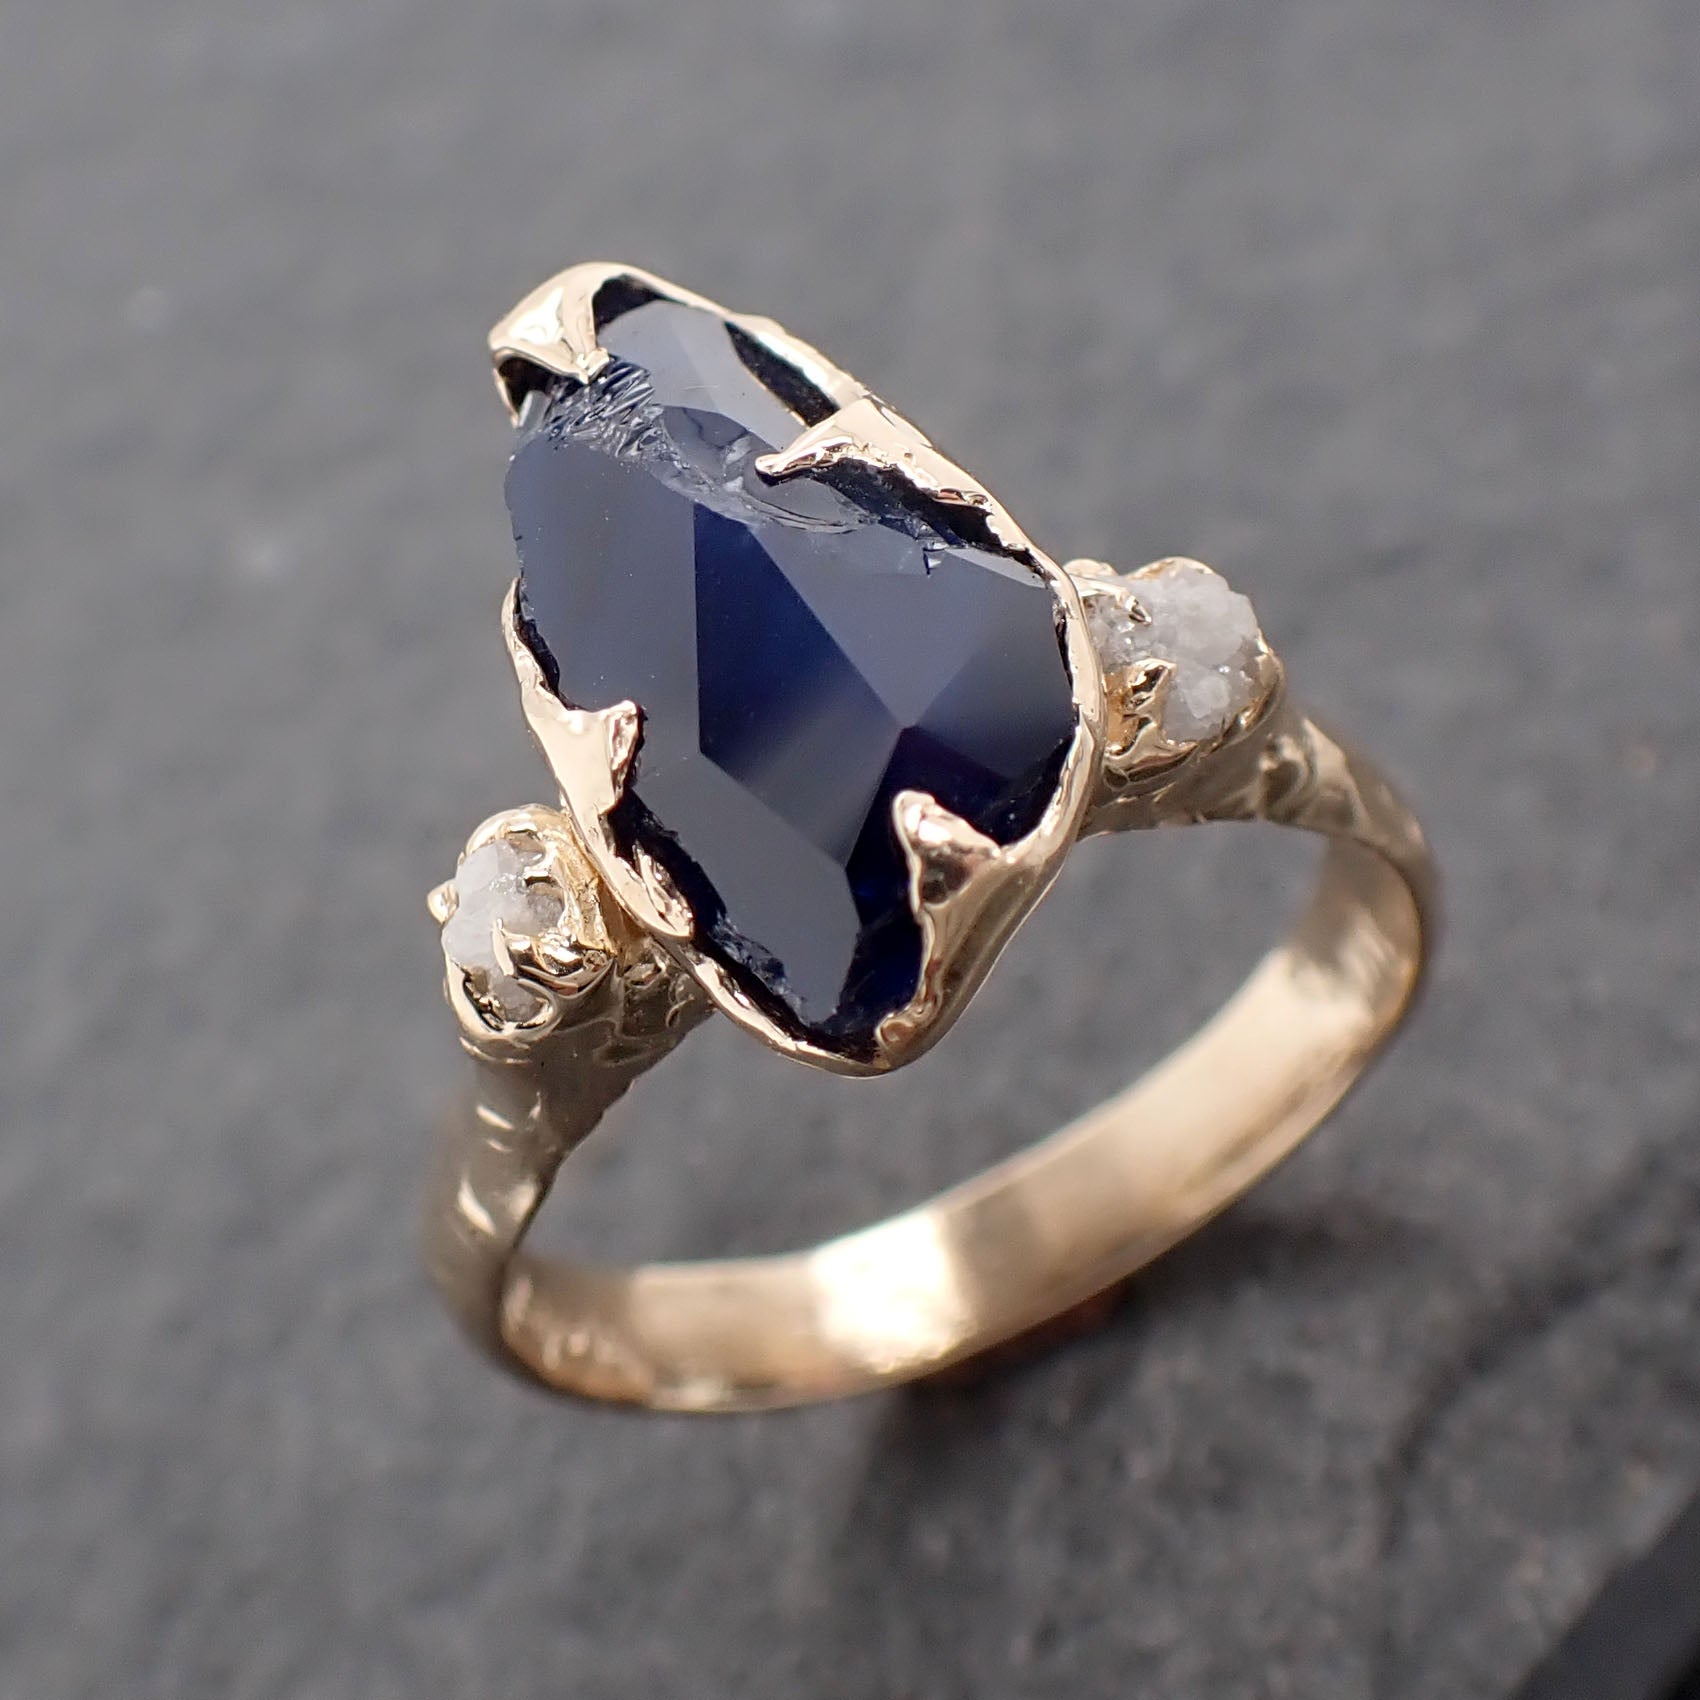 Partially faceted dark blue Sapphire and Diamonds 18k Gold Engagement Wedding Gemstone Multi stone Ring 2442